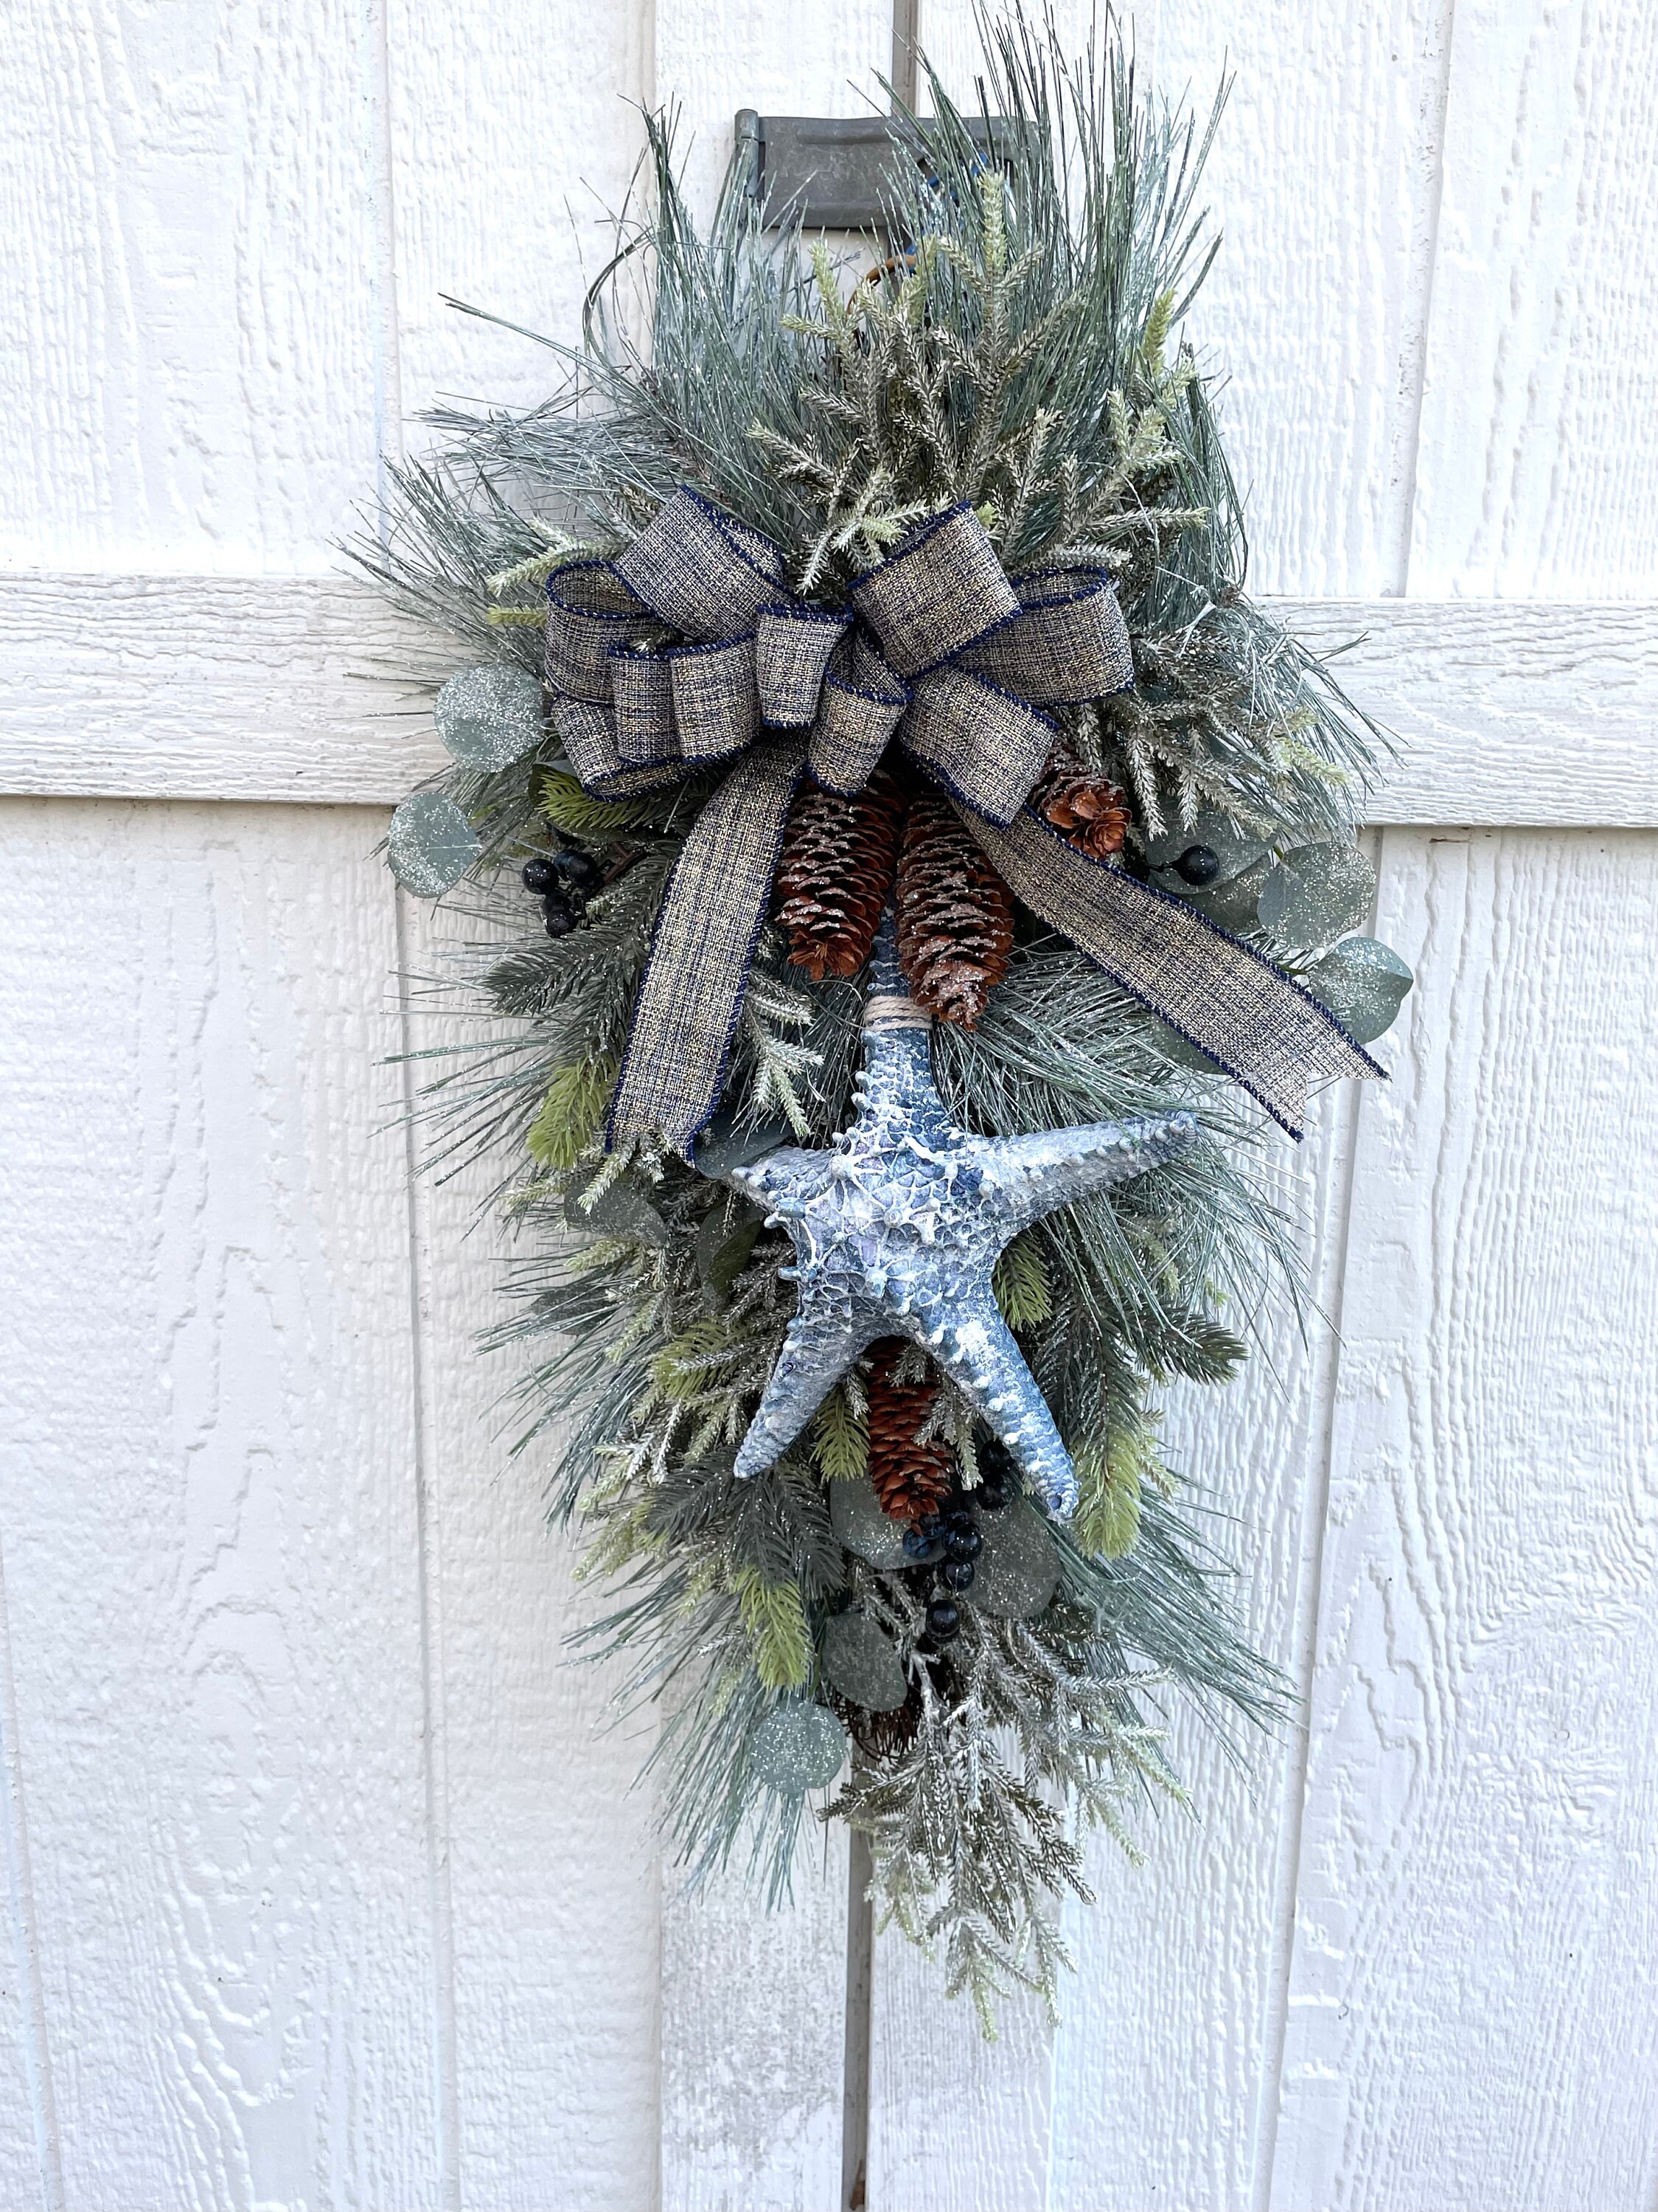 Winter Wreath for Front Door, Porch Decor, Farmhouse Winter Wreath With Red  Buffalo Plaid/check Ribbon, Snowflake Wreath 